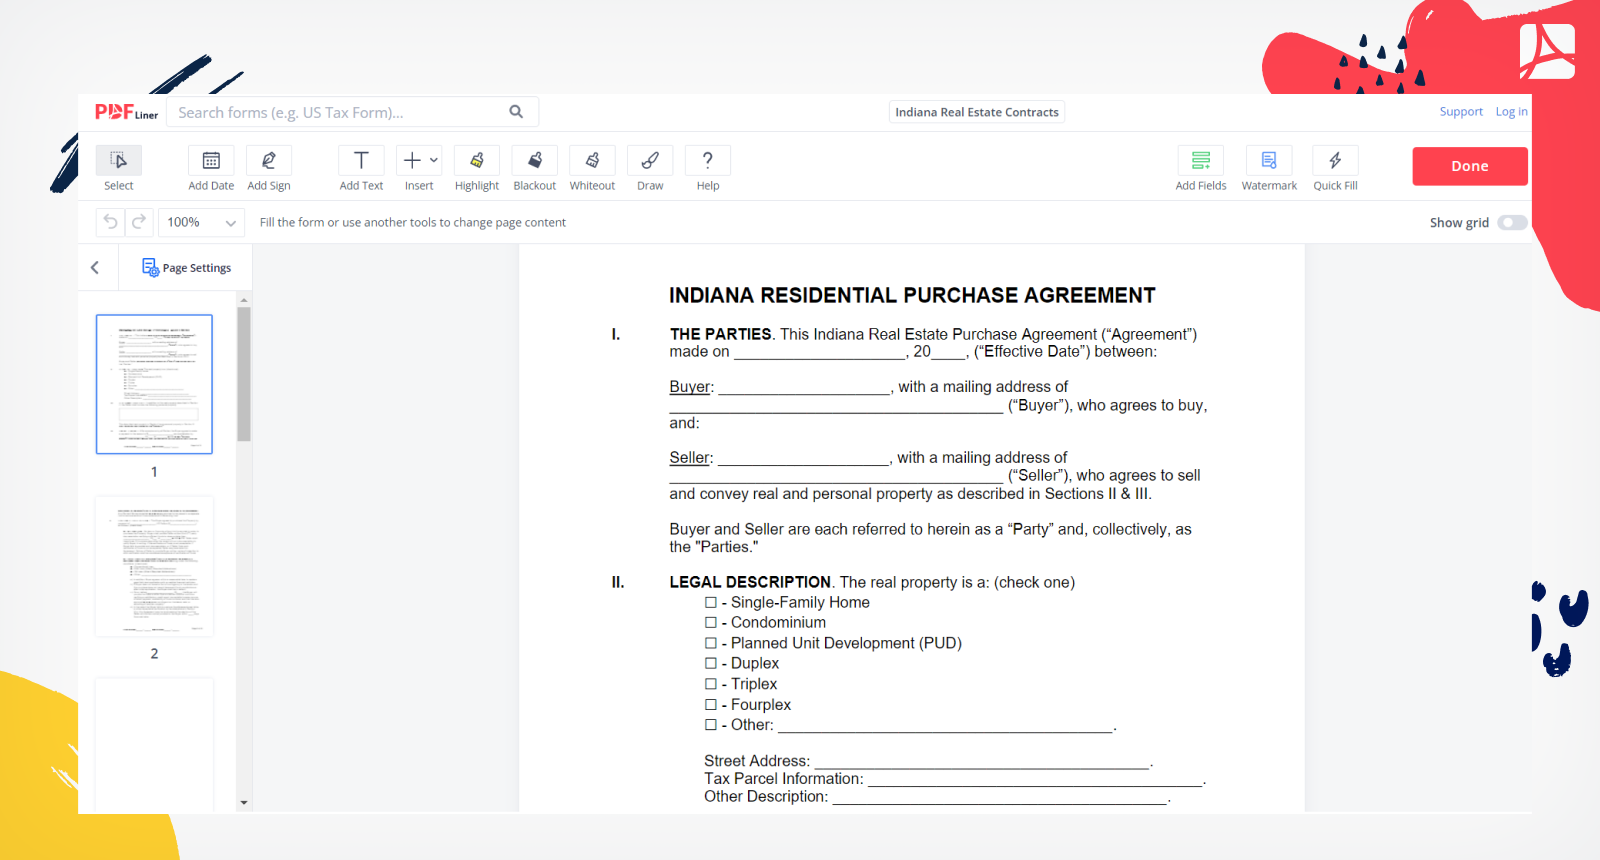 Indiana Real Estate Contracts Form Screenshot